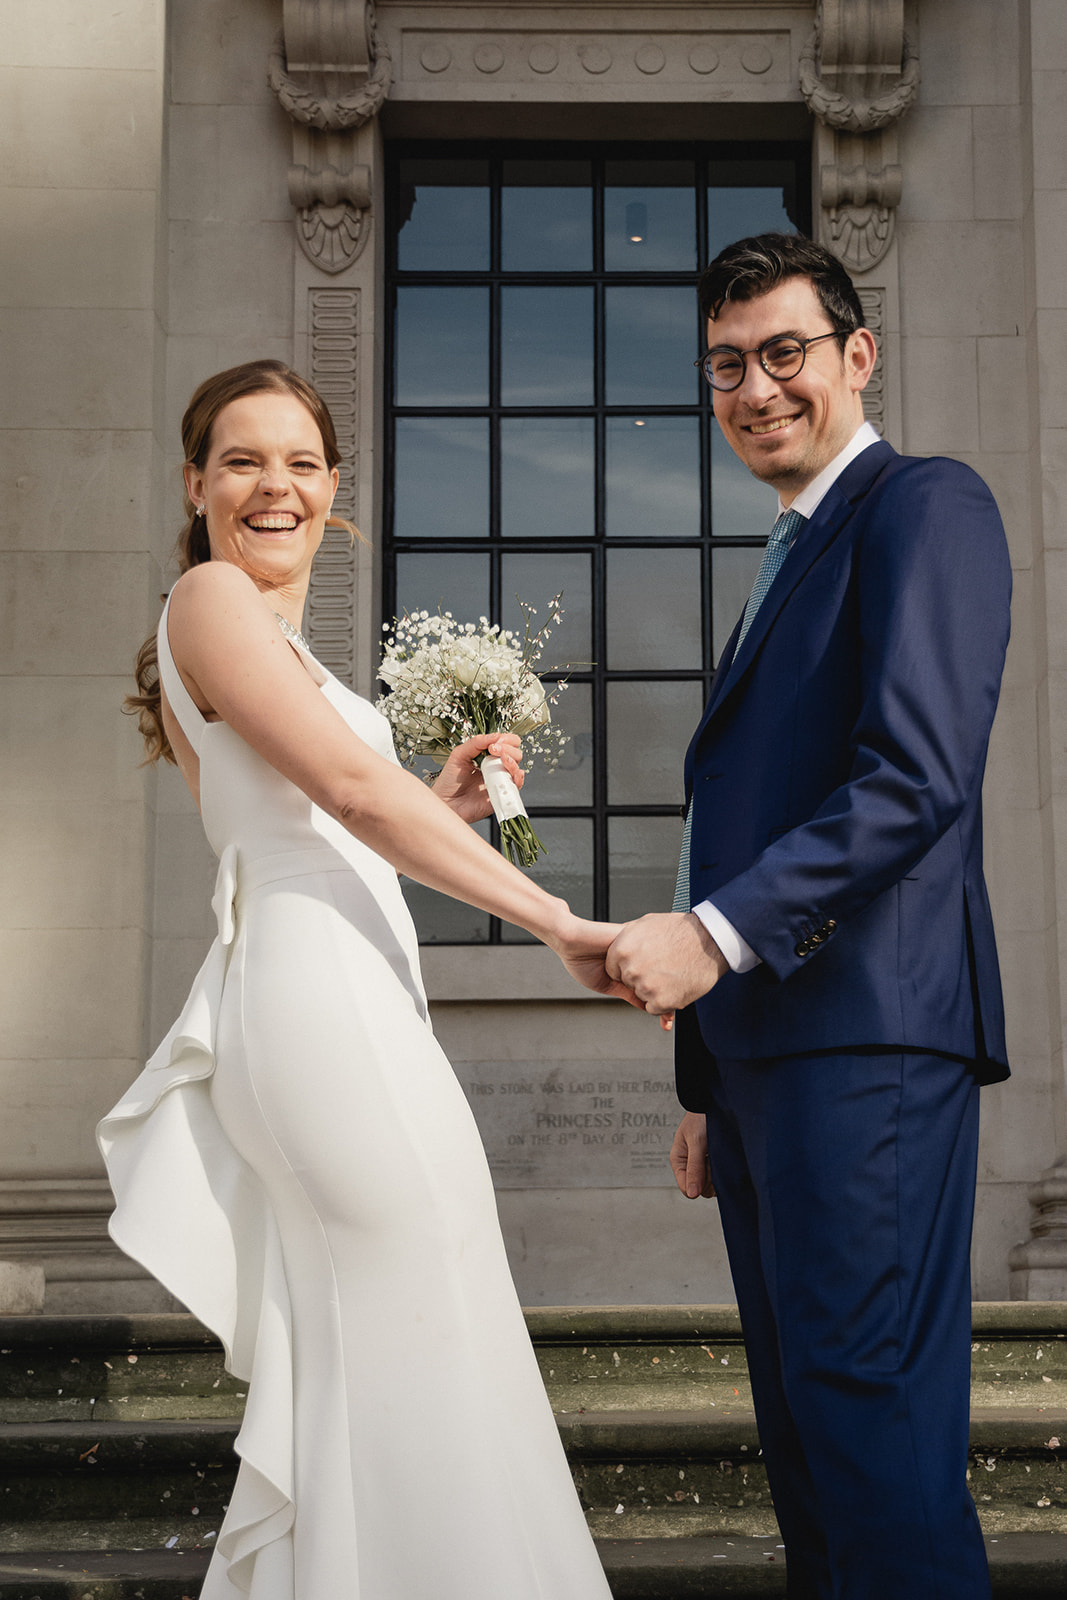 Kinga and Jean-Marc's stunning portrait on the steps of Marylebone Town Hall